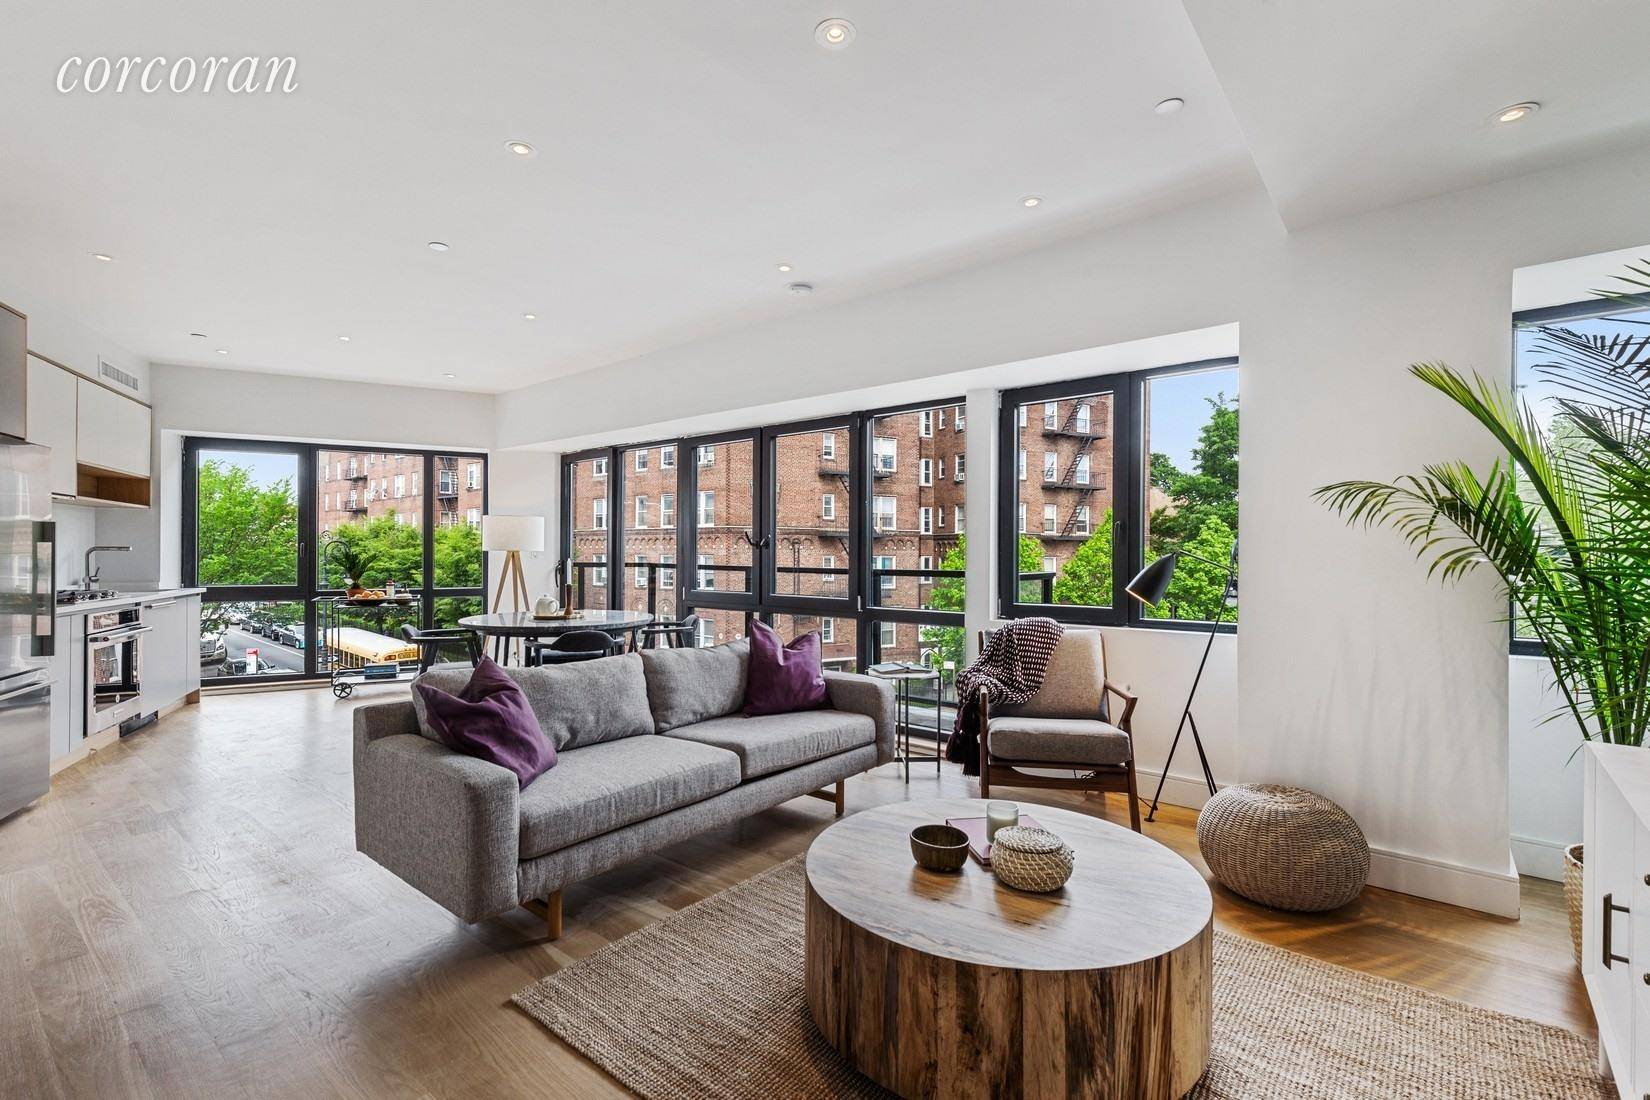 STYLE, QUALITY AND AMENITIES NEVER BEFORE SEEN IN DITMAS PARK Residence 3B at 1702 Newkirk Avenue is a 2 bedroom, 2 bathroom condo with 2 private balconies and 4 exposures.